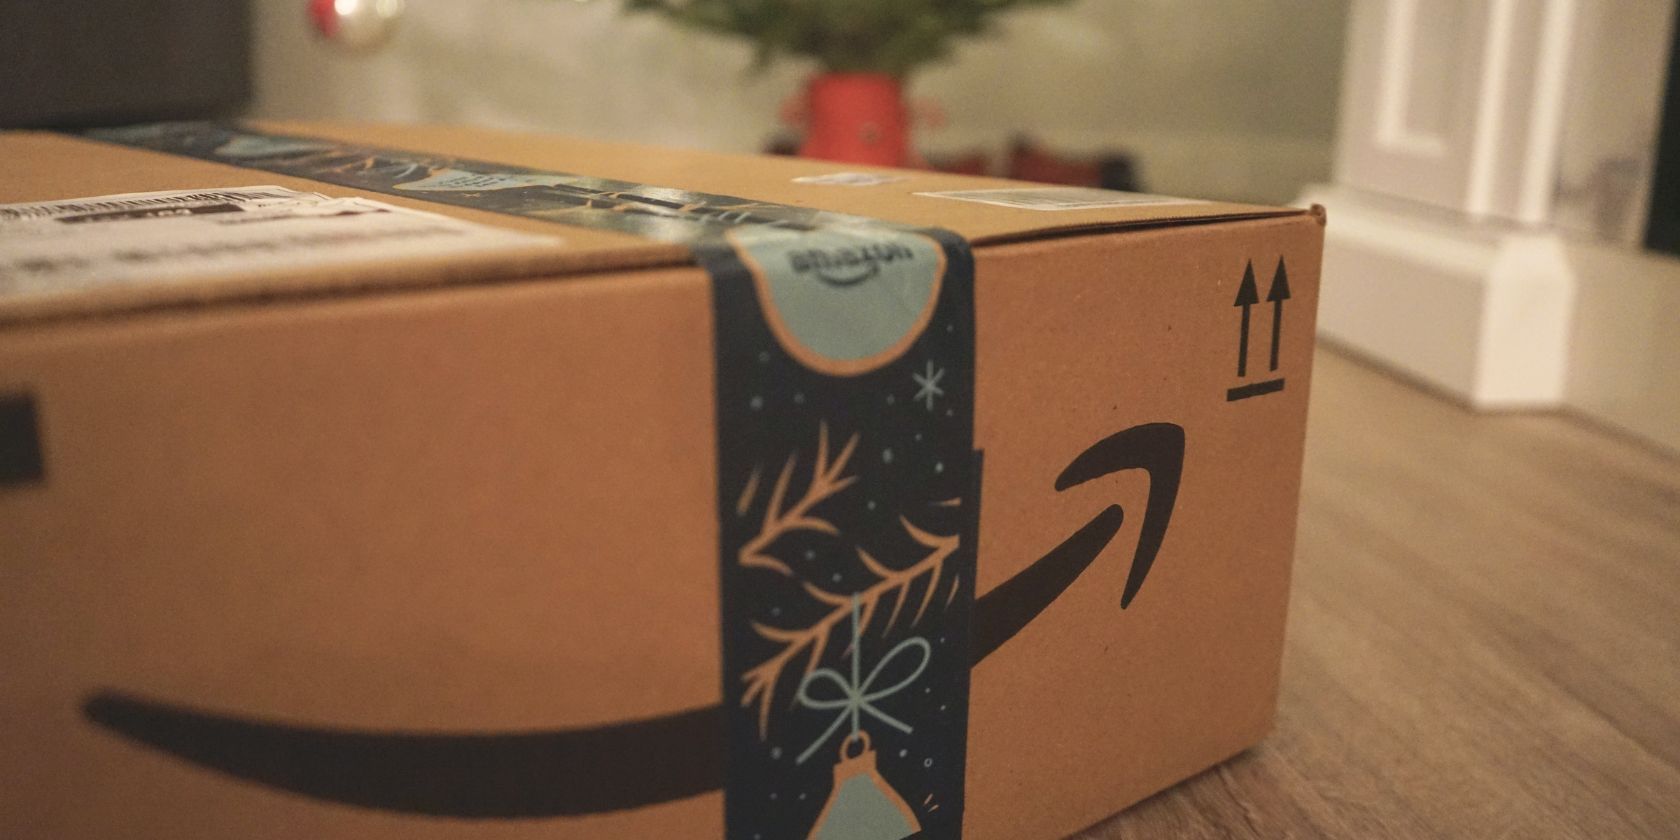 An amazon package sits in the foreground with festive decorations in the background.